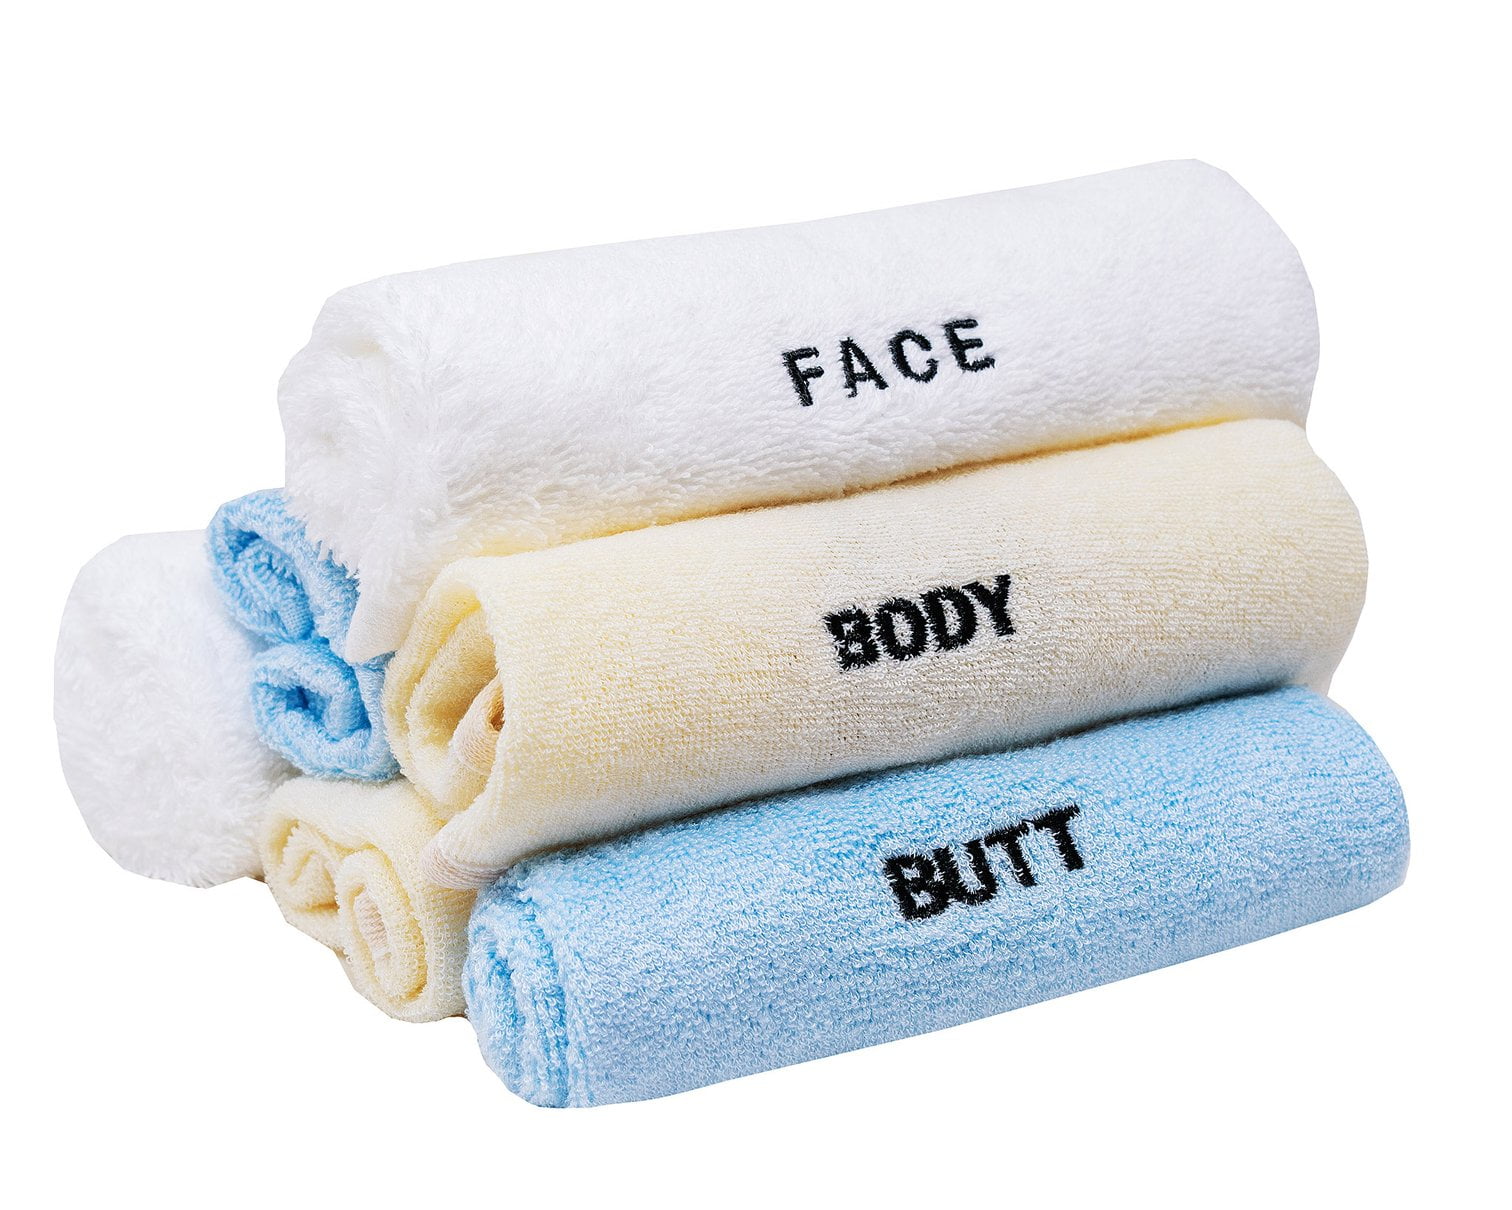 Crafty Cloth INC Complete Washcloth Set Embroidered Bathroom Set, Face Body  Butt Washcloth Towel in White, Beige, and Blue by Crafty Cloth - 6 Piece